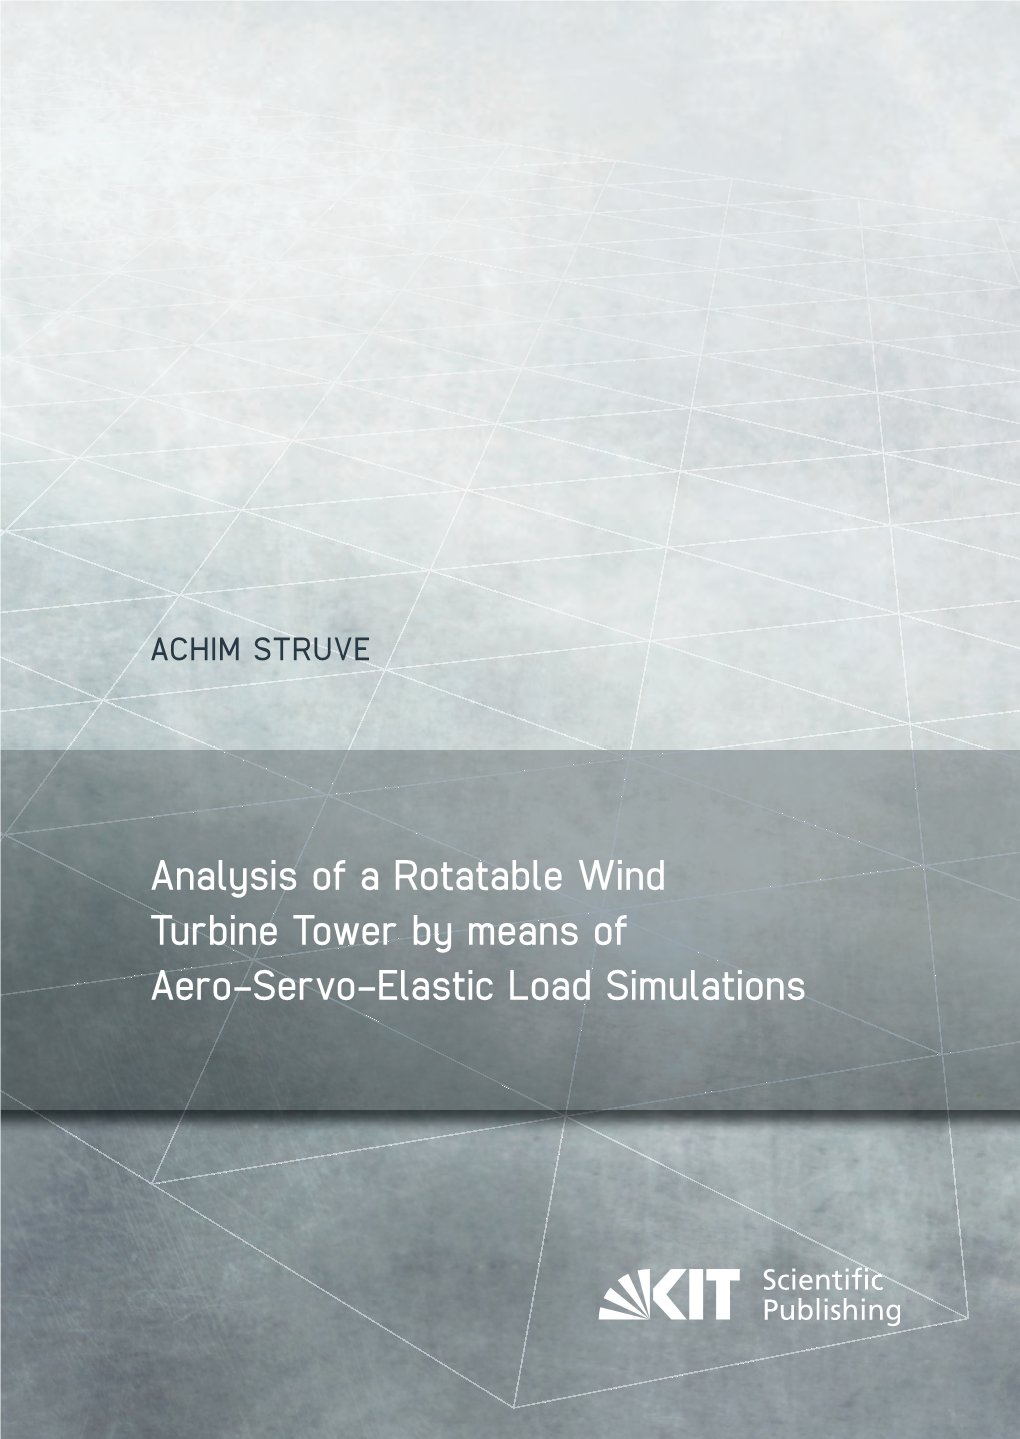 Analysis of a Rotatable Wind Turbine Tower by Means of Aero-Servo-Elastic Load Simulations ACHIM STRUVE ACHIM